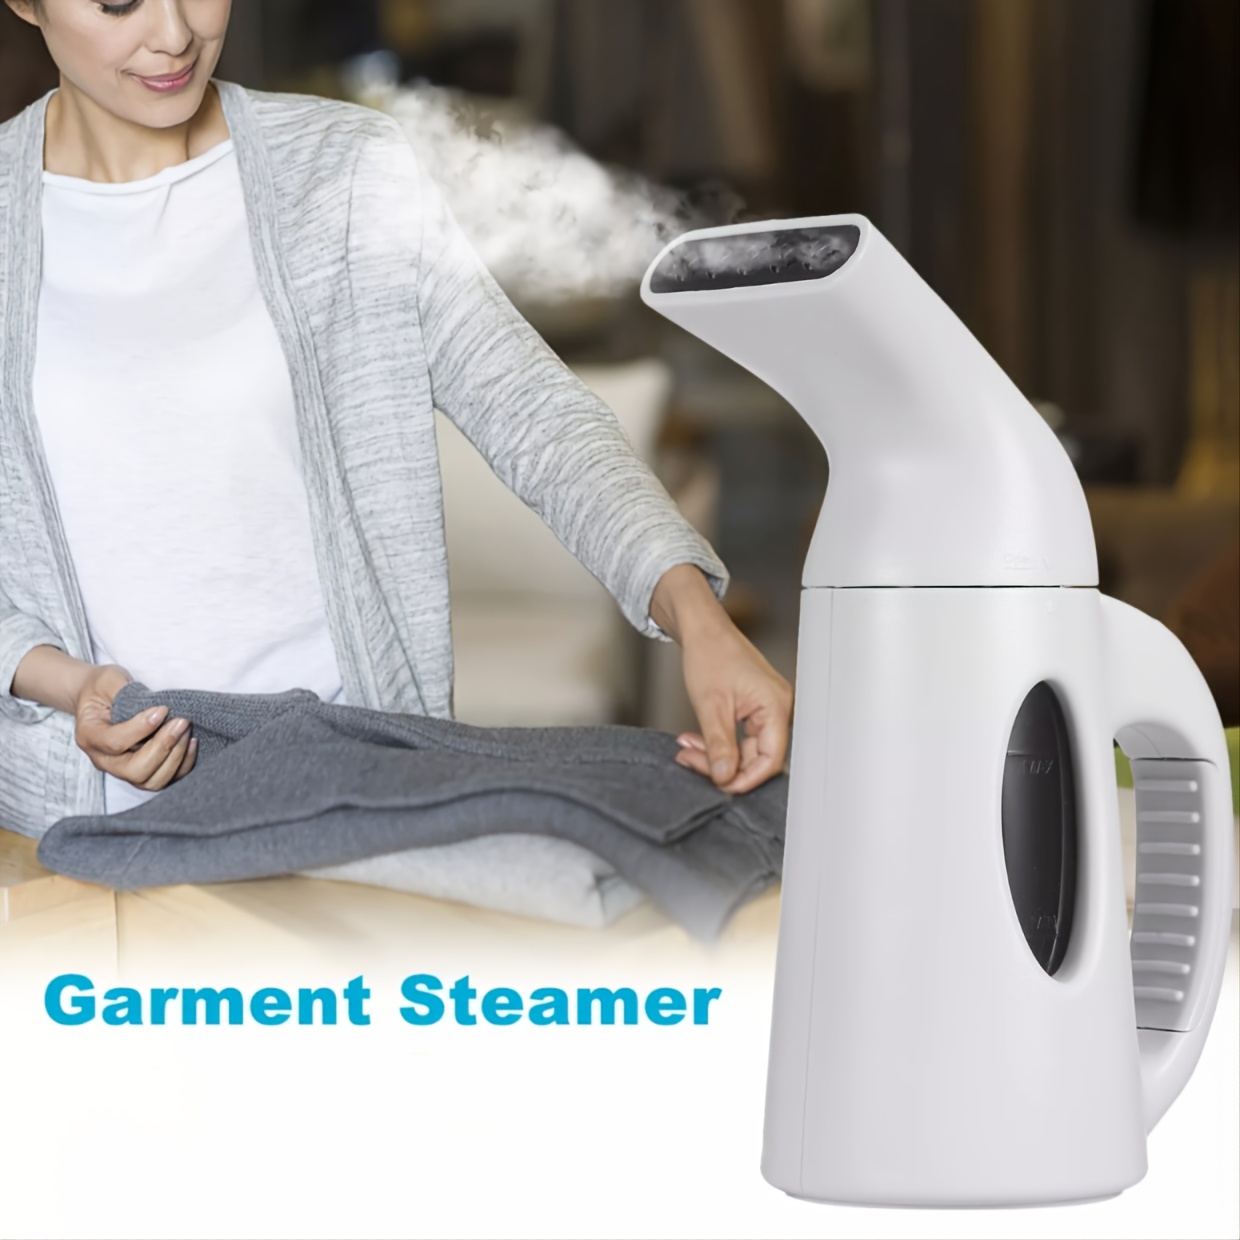 Clothes Steamers Are Better Than Irons: Here's Why